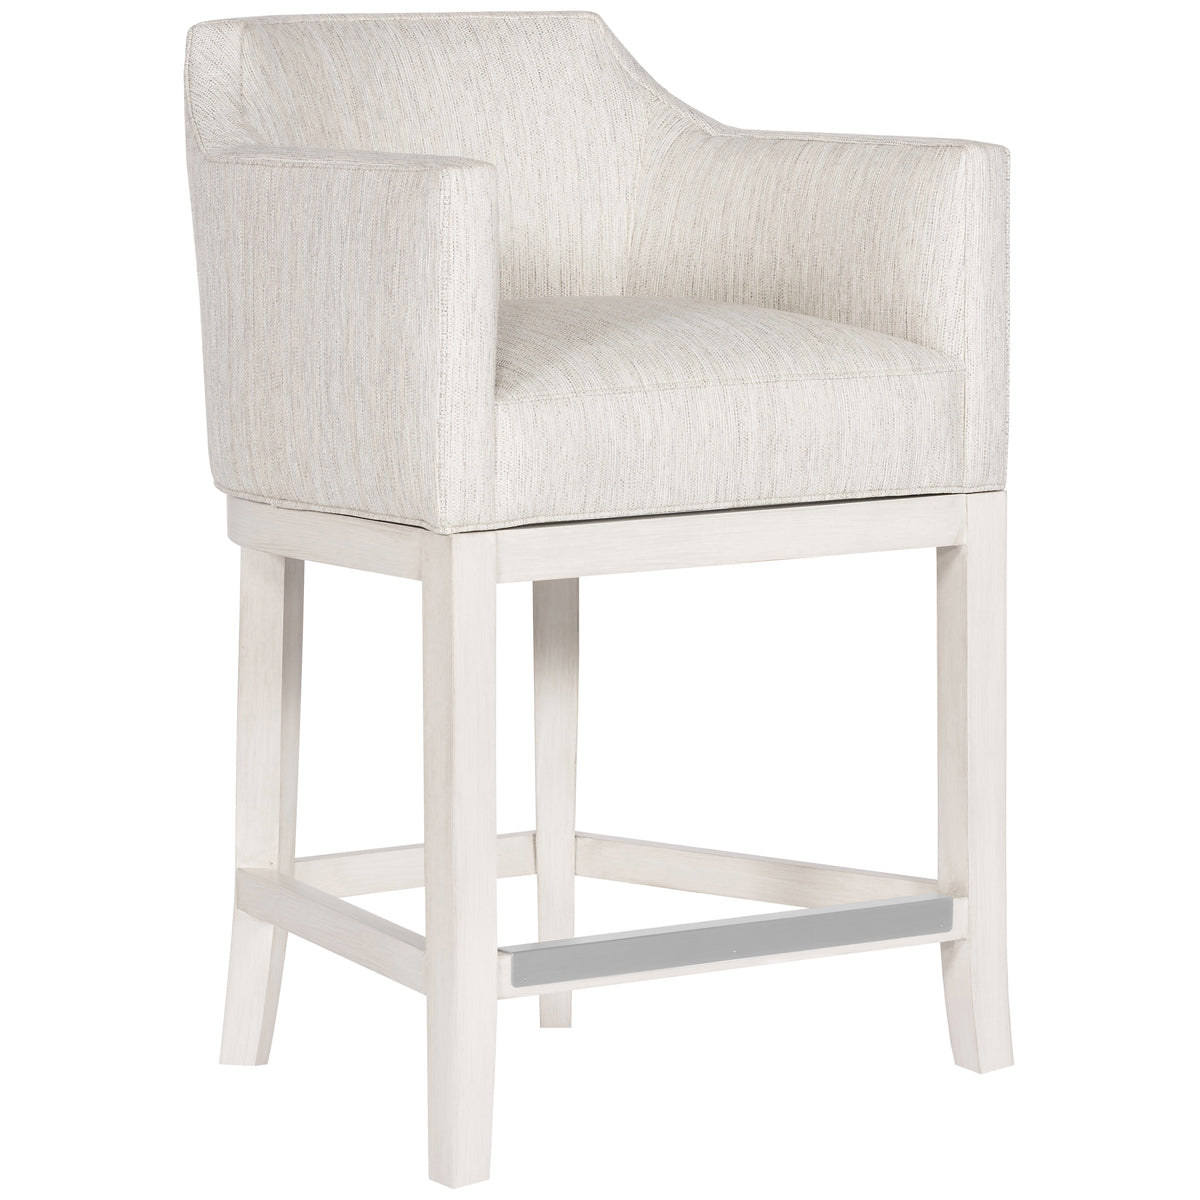 Vanguard Furniture Stocked Counterstool with Wood Flare Base